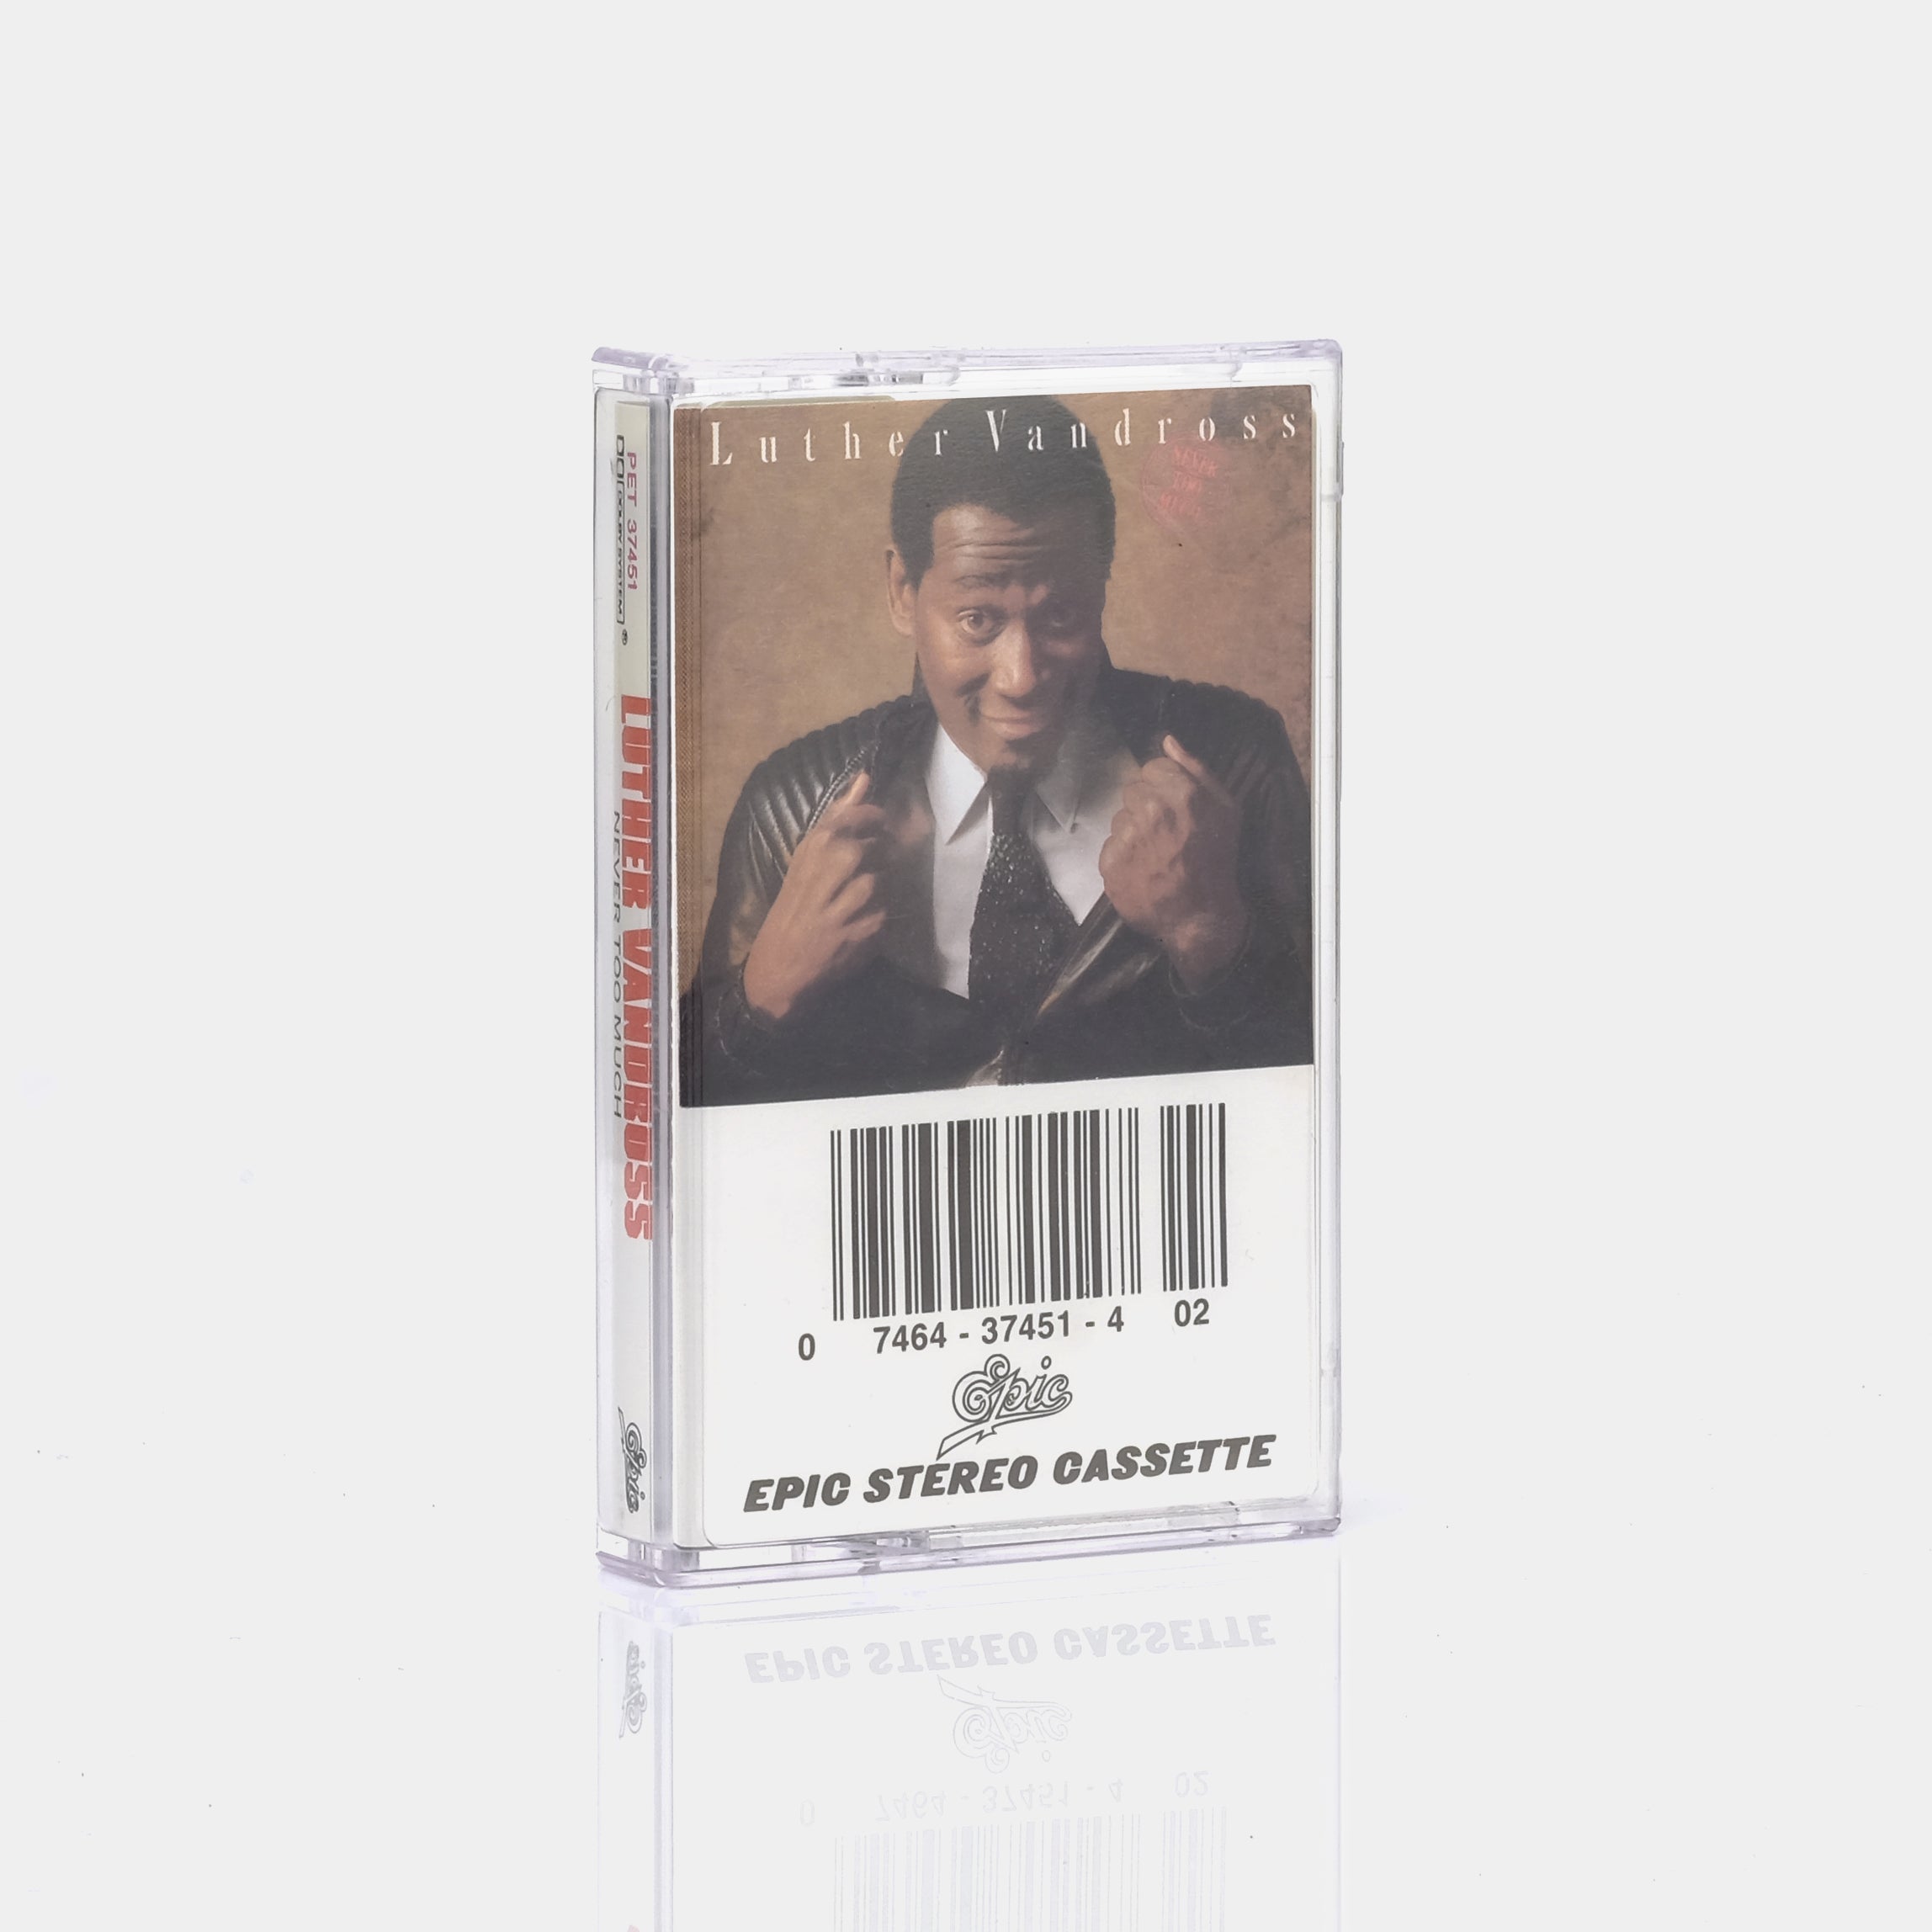 Luther Vandross - Never Too Much Cassette Tape